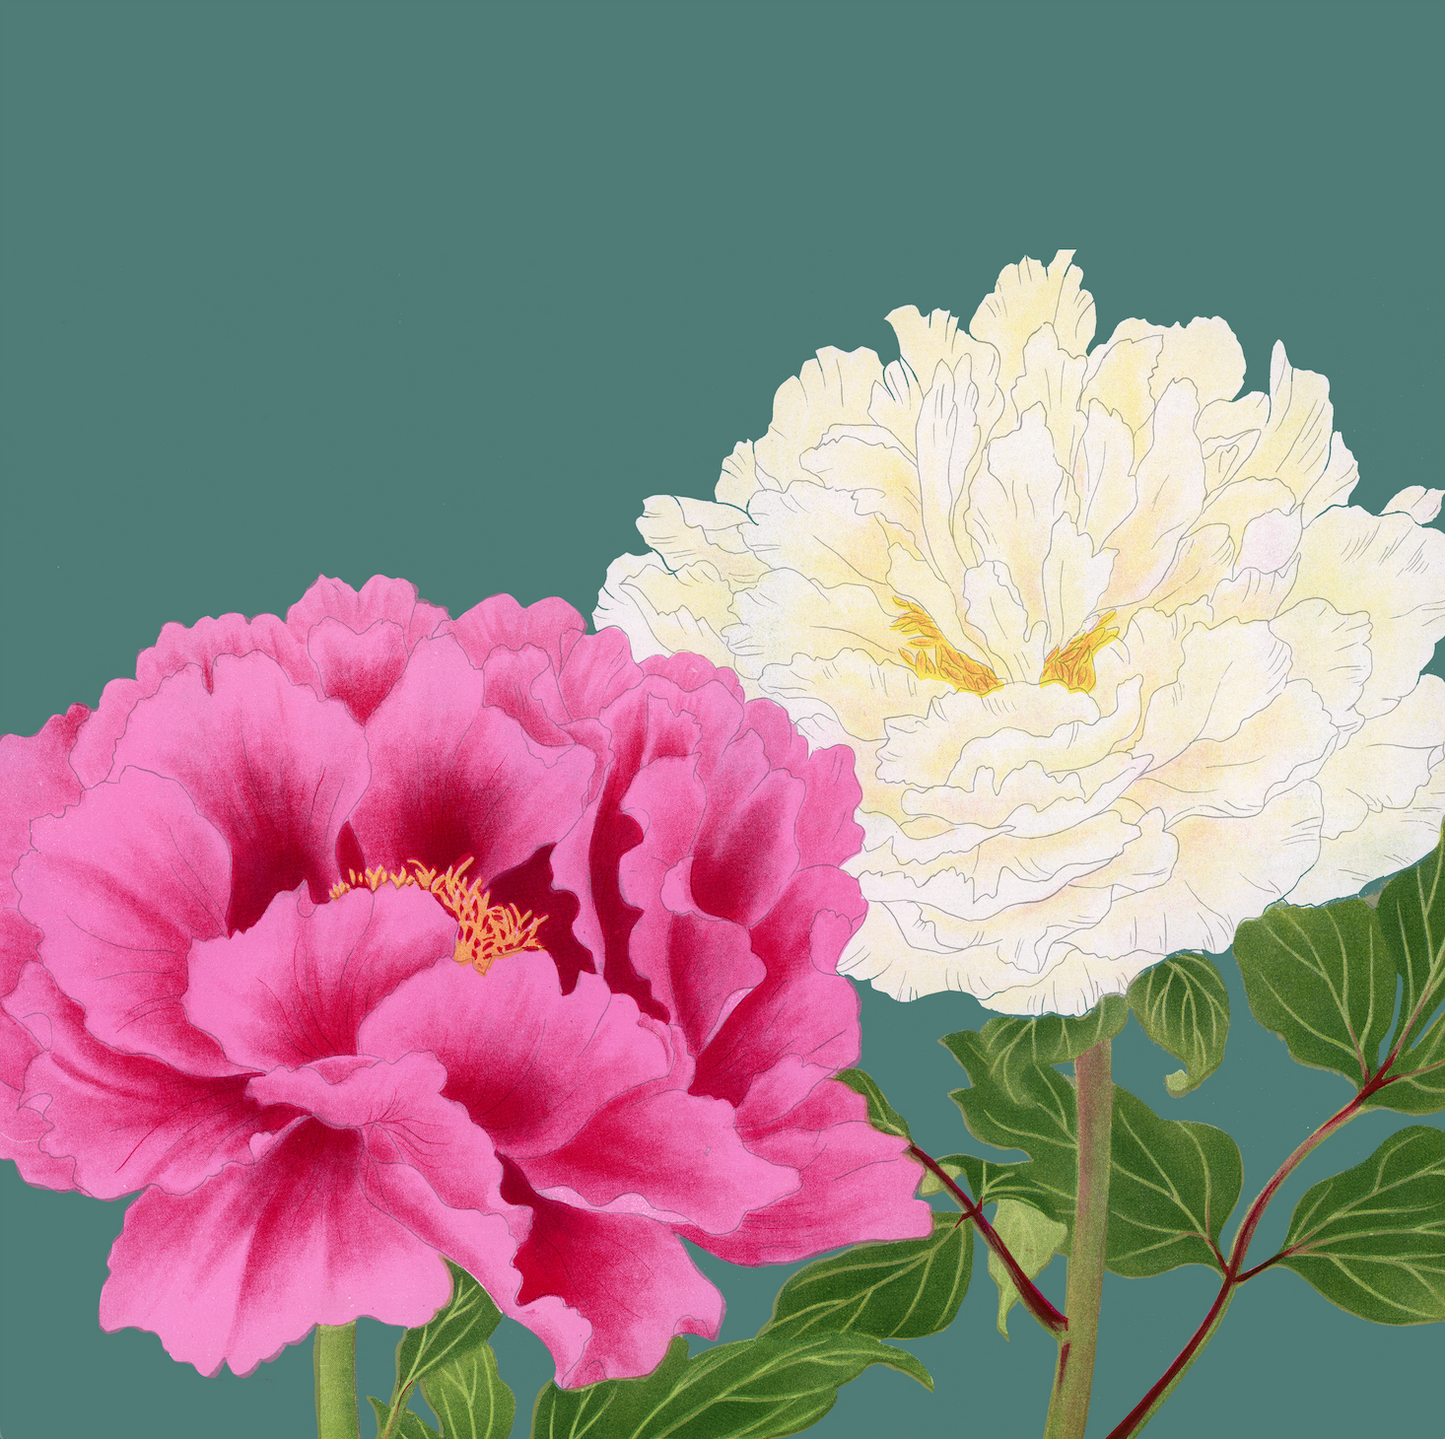 peonies on grey-green background.